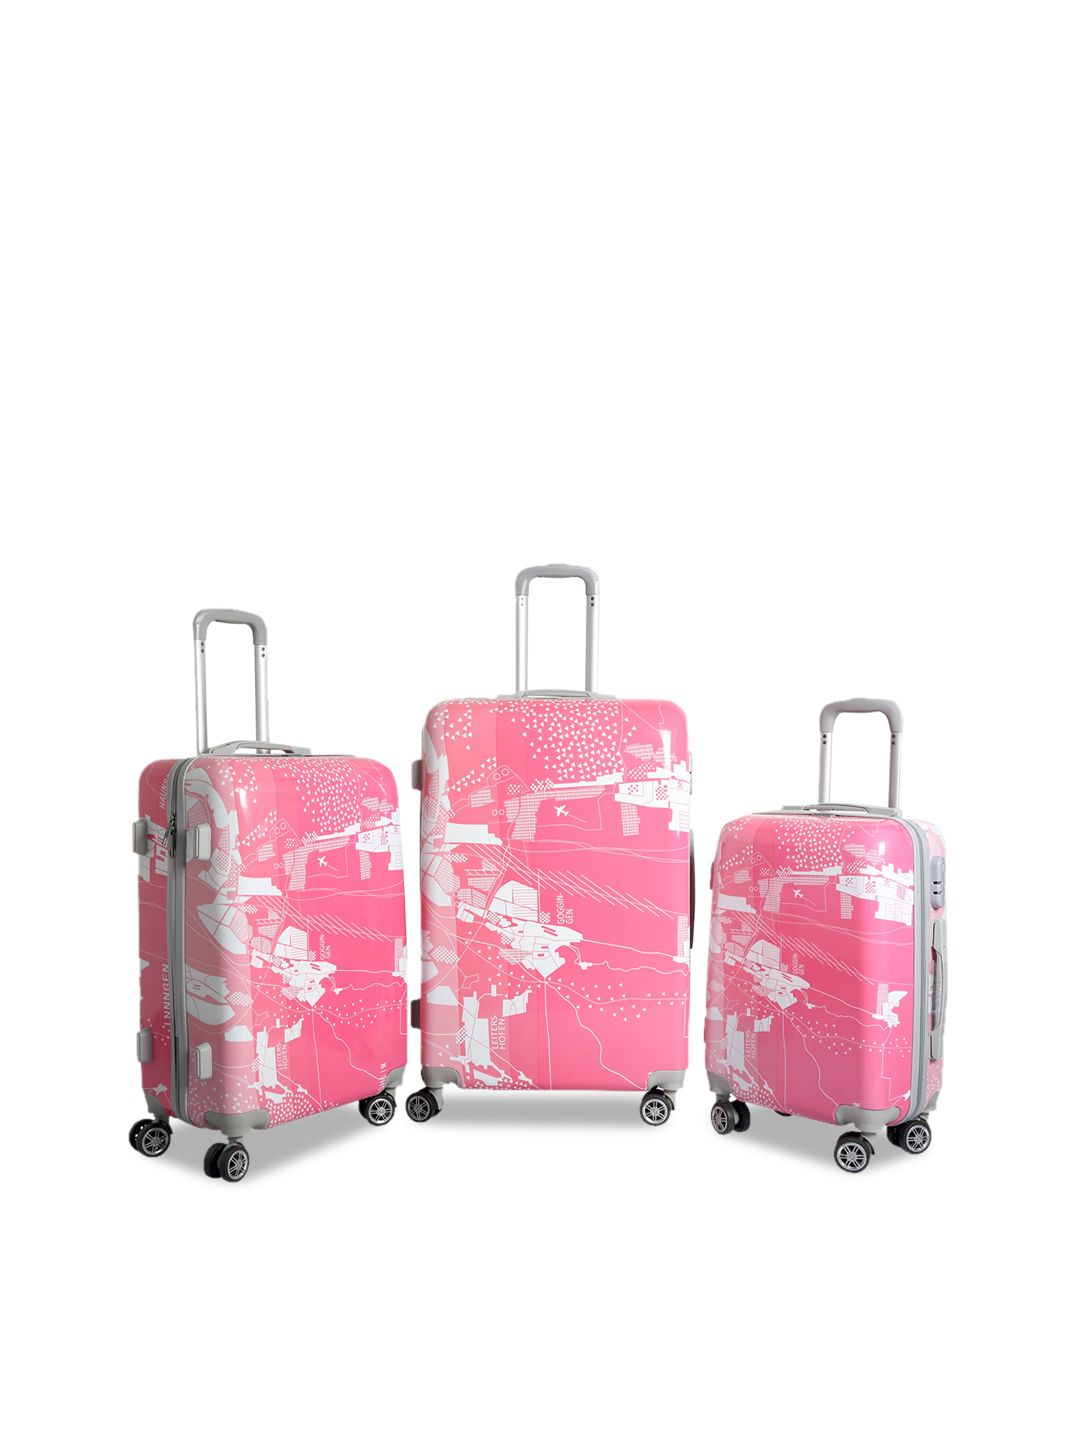 Polo Class Pink & White Set of 3 Hard Luggage Trolley Bags Price in India